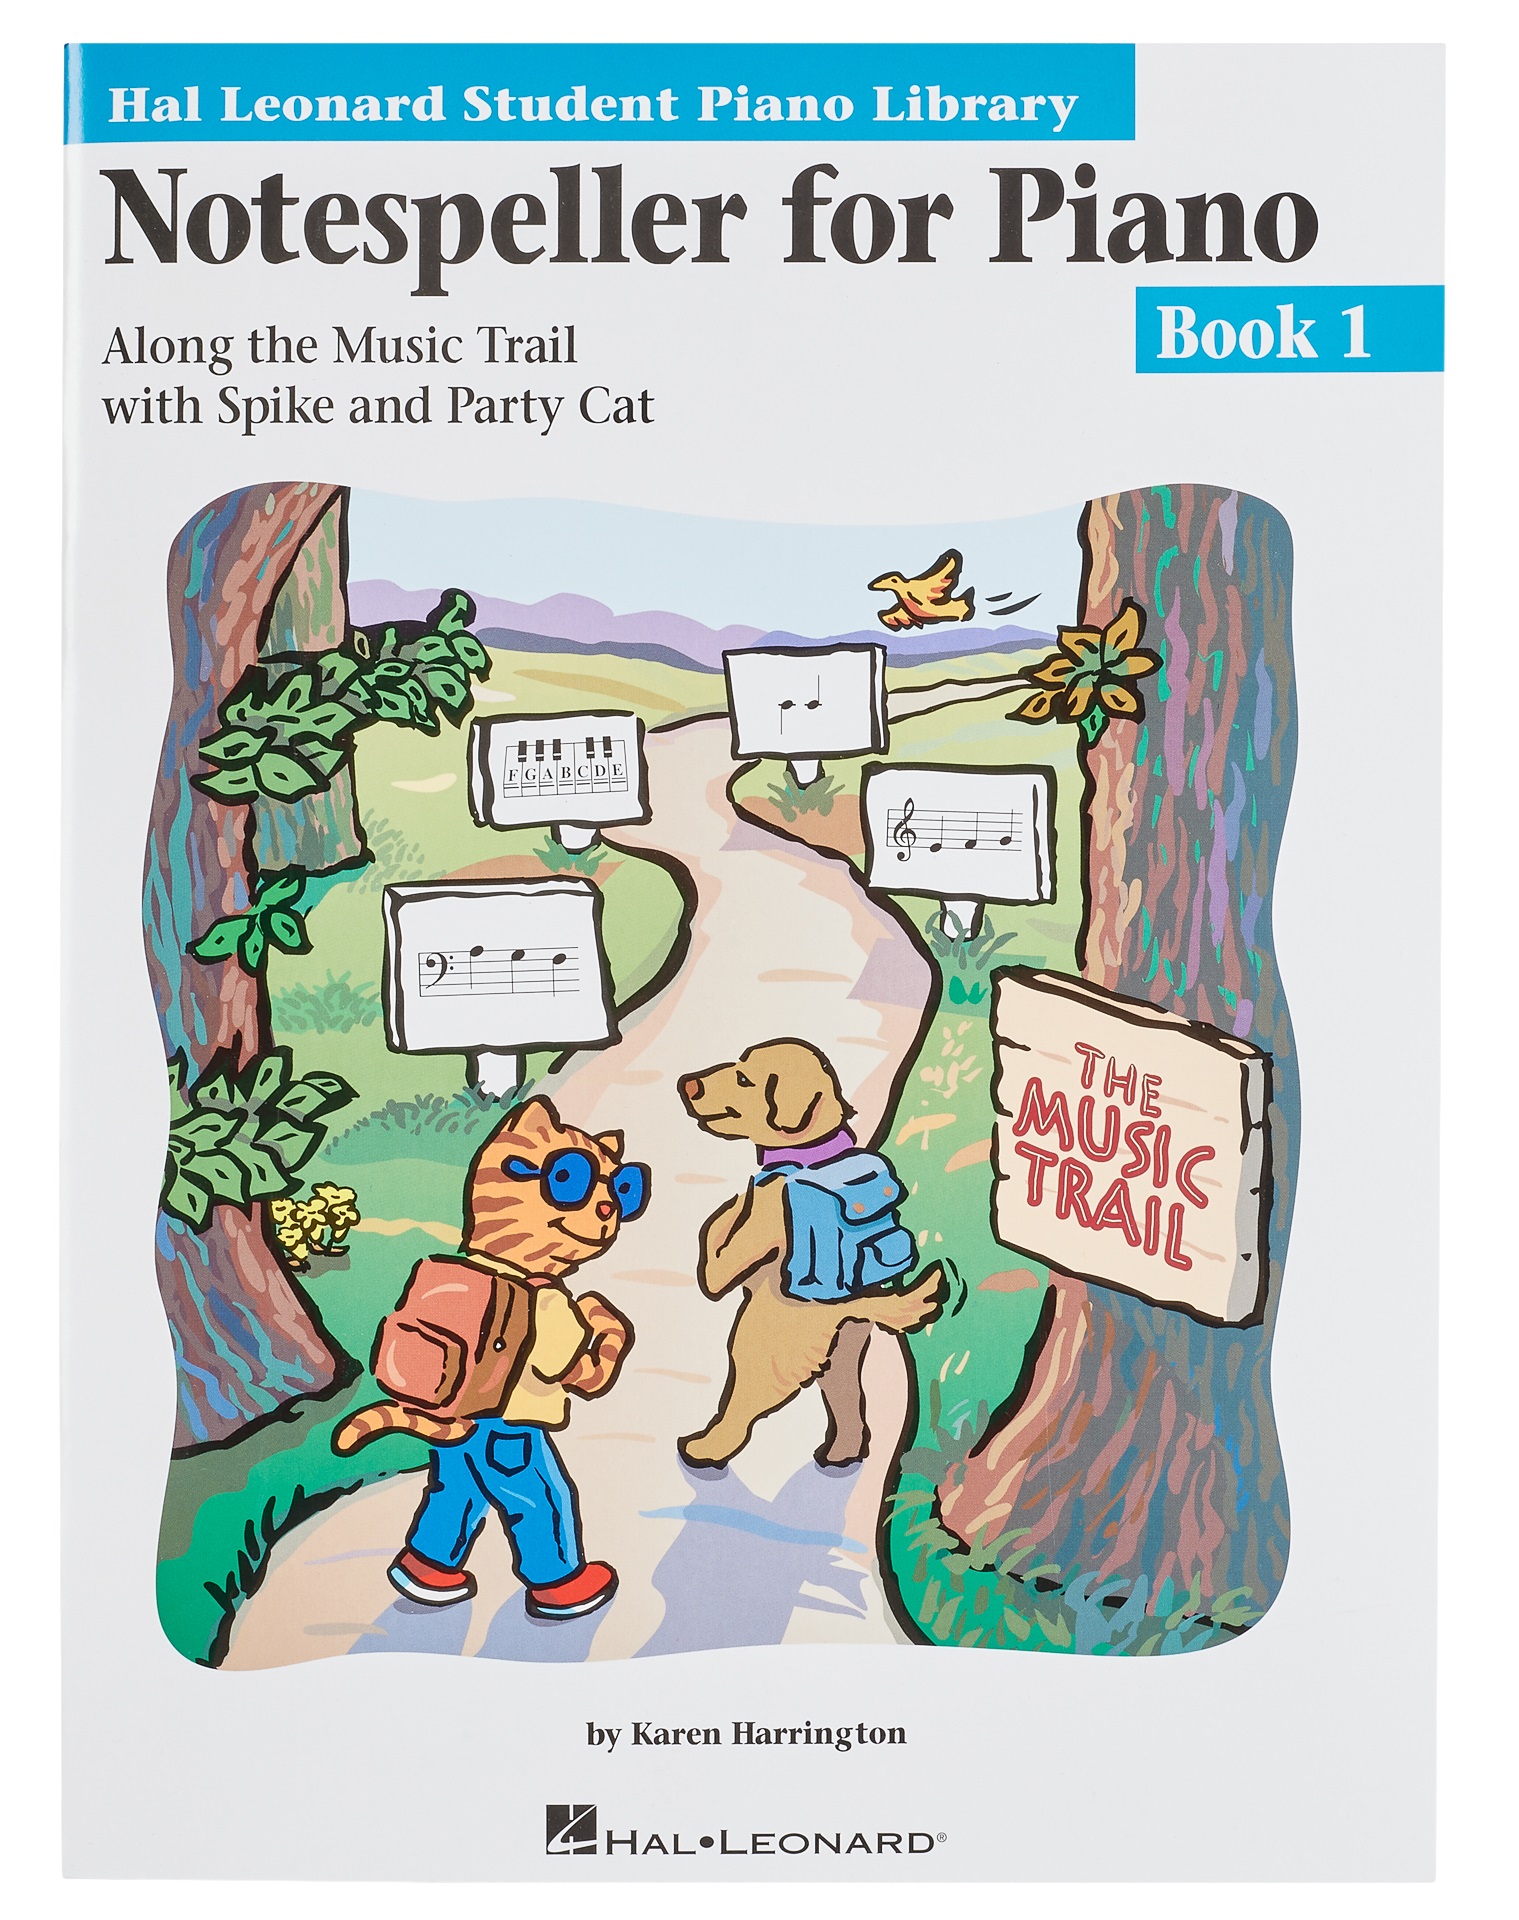 MS Hal Leonard Student Piano Library: Notespeller For Piano Book 1